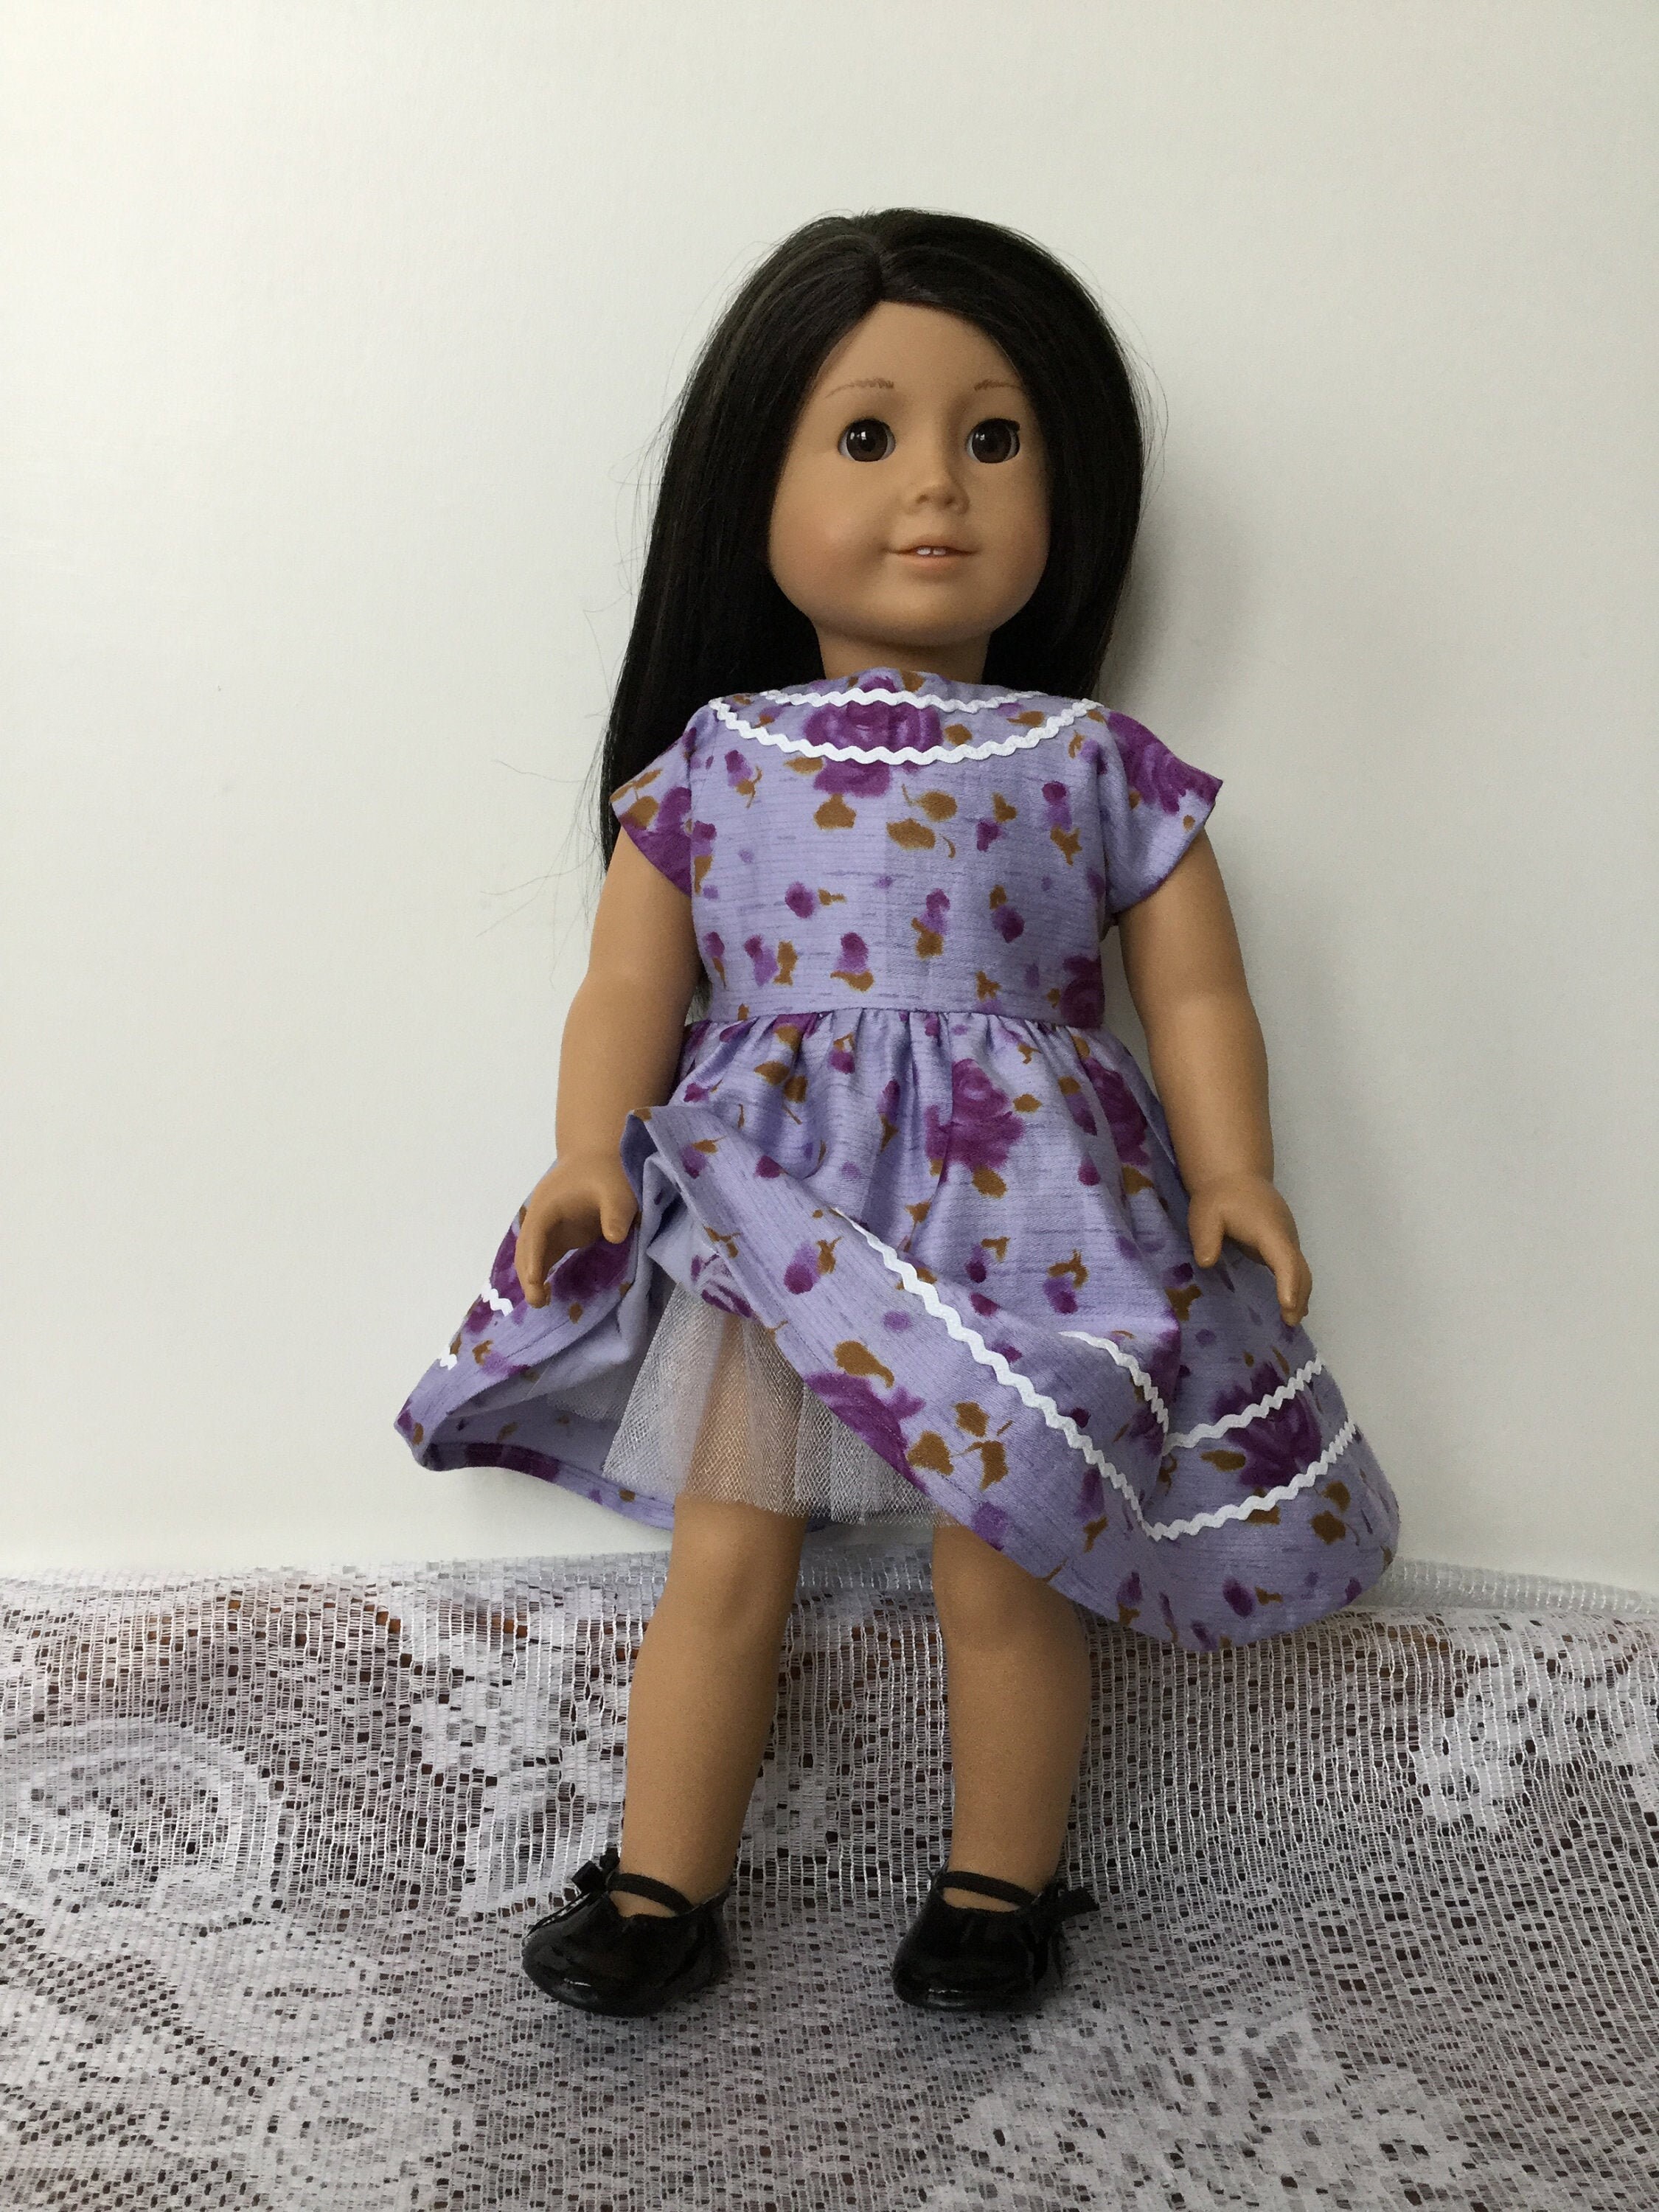 18 inch doll clothes that will fit American Girl Doll or My Life Doll homemade 